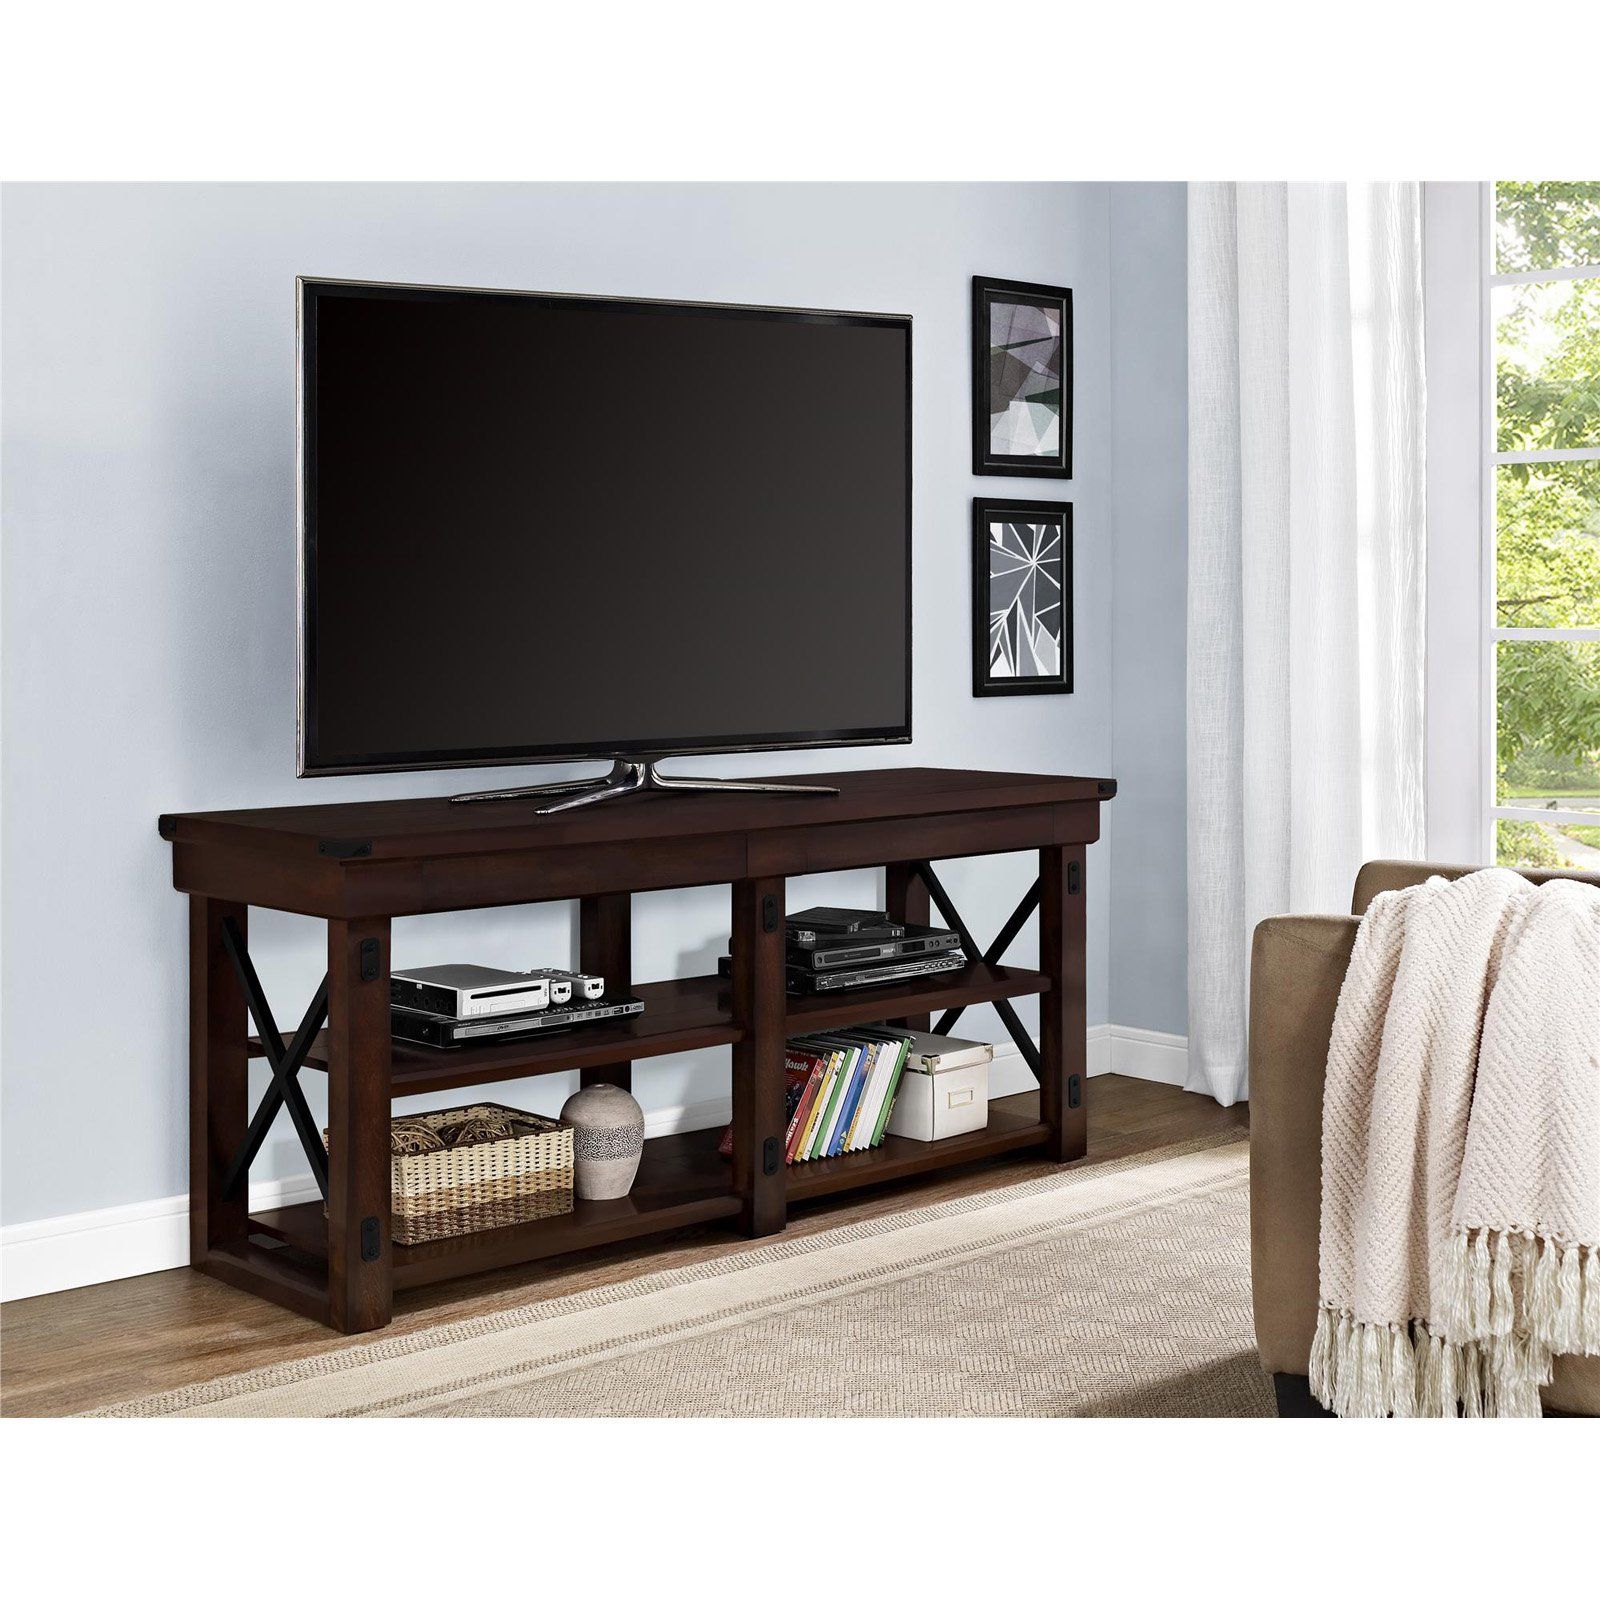 Ameriwood Home Wildwood Tv Stand For Tvs Up To 65 Inside Calea Tv Stands For Tvs Up To 65" (View 4 of 15)